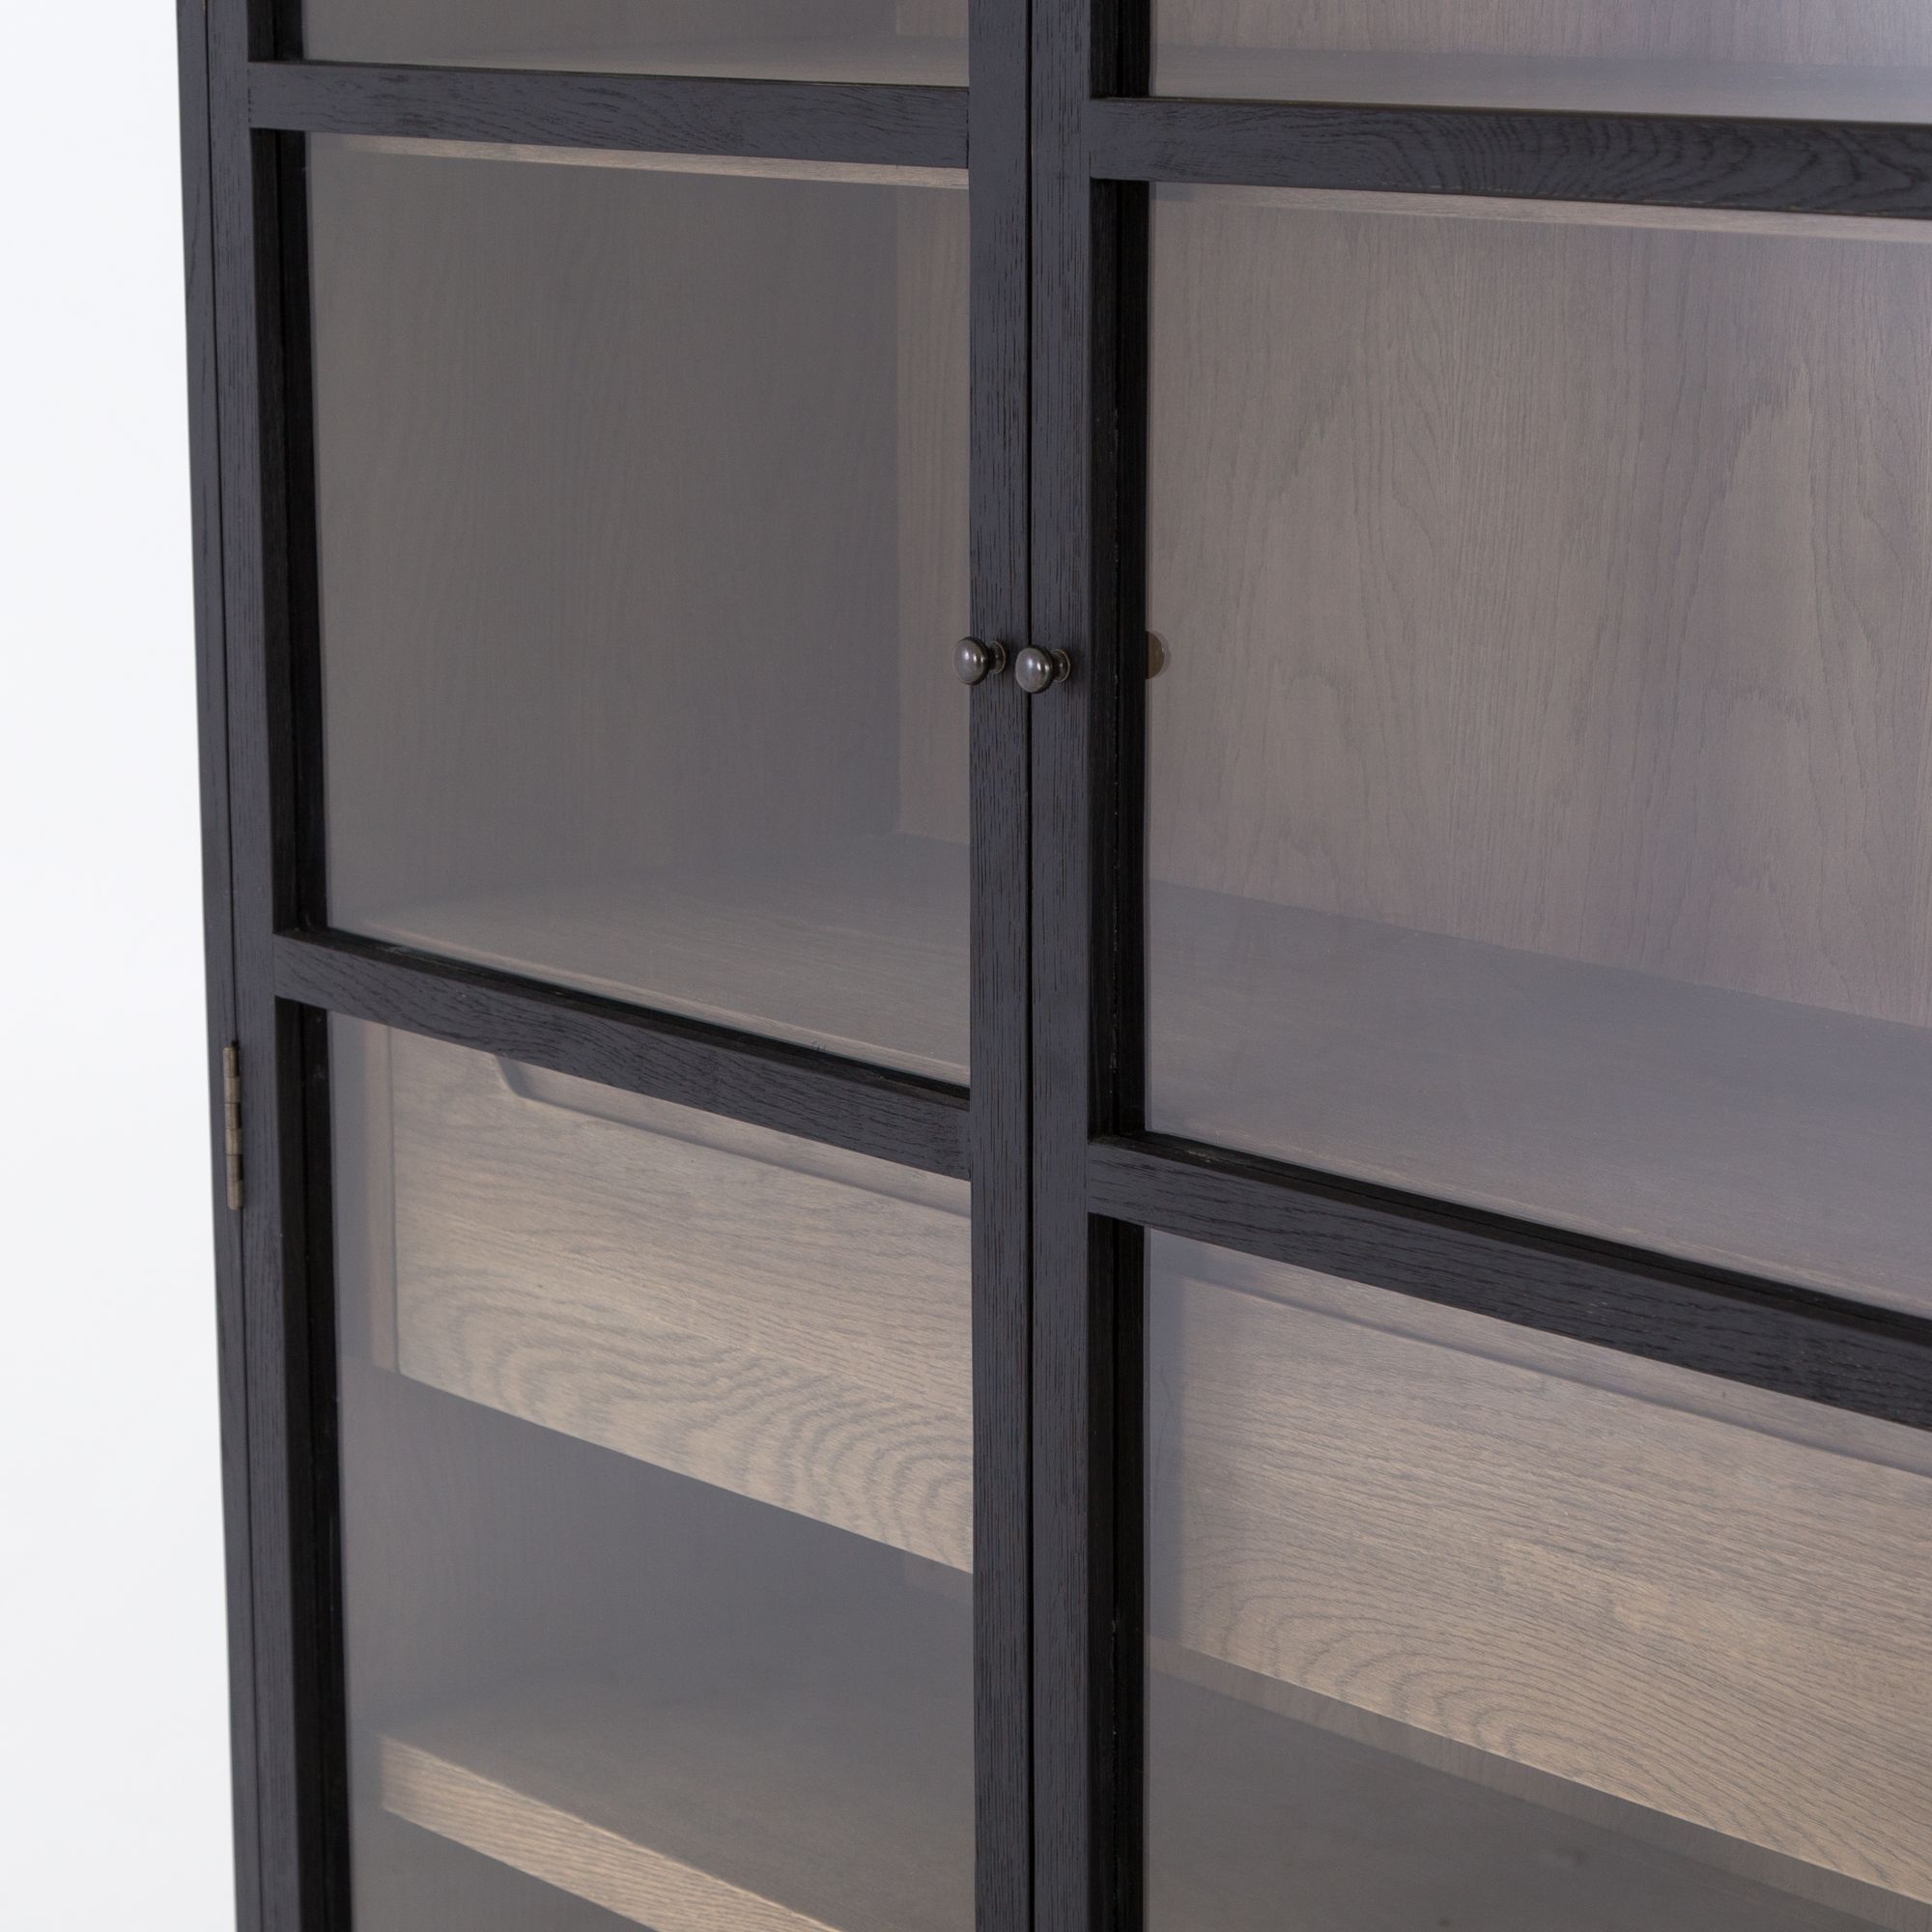 60 Crystal Cove Glass Cabinet Black - Threshold™ Designed With